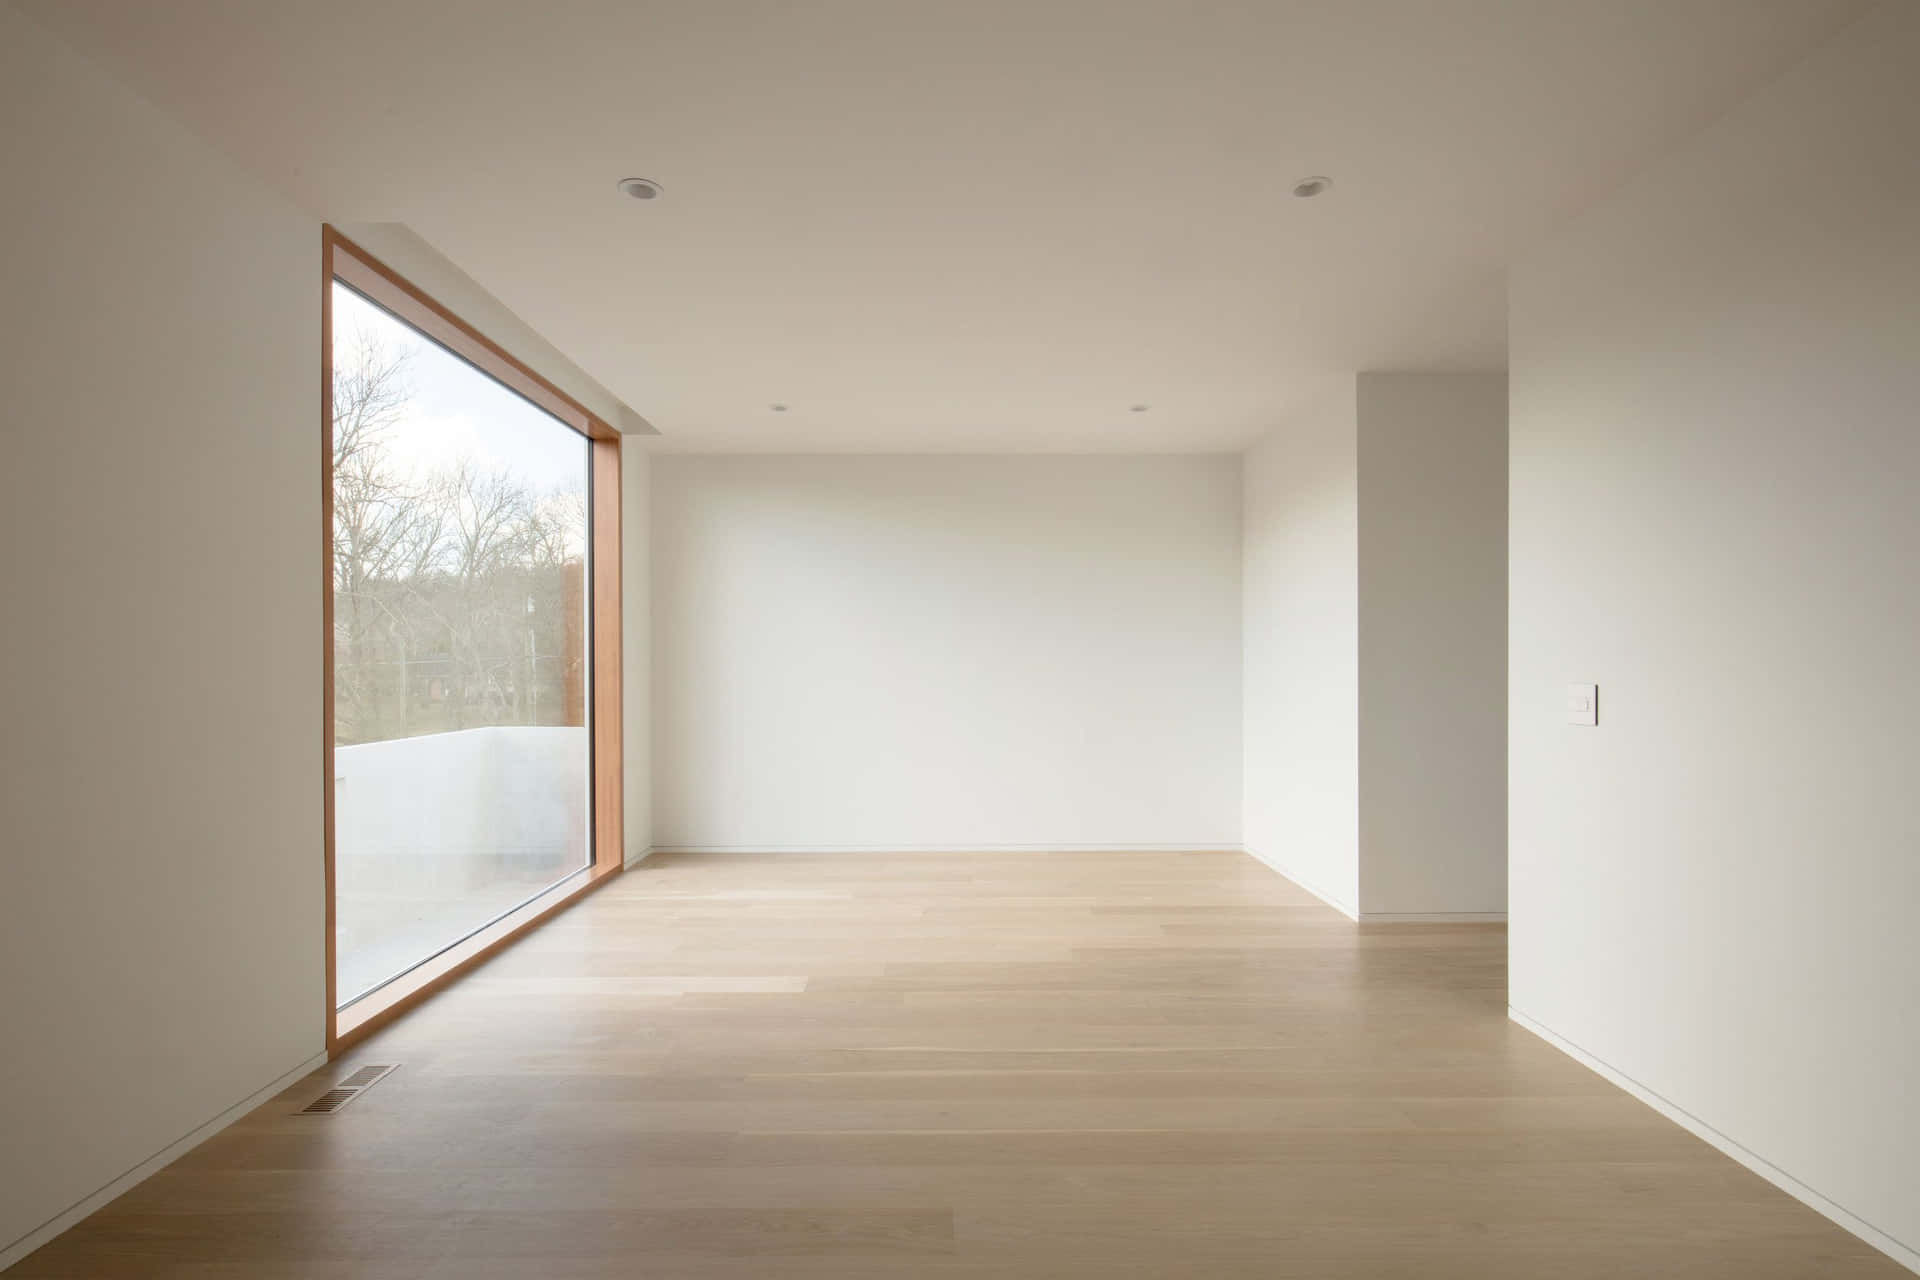 A Room With White Walls And Wood Floors